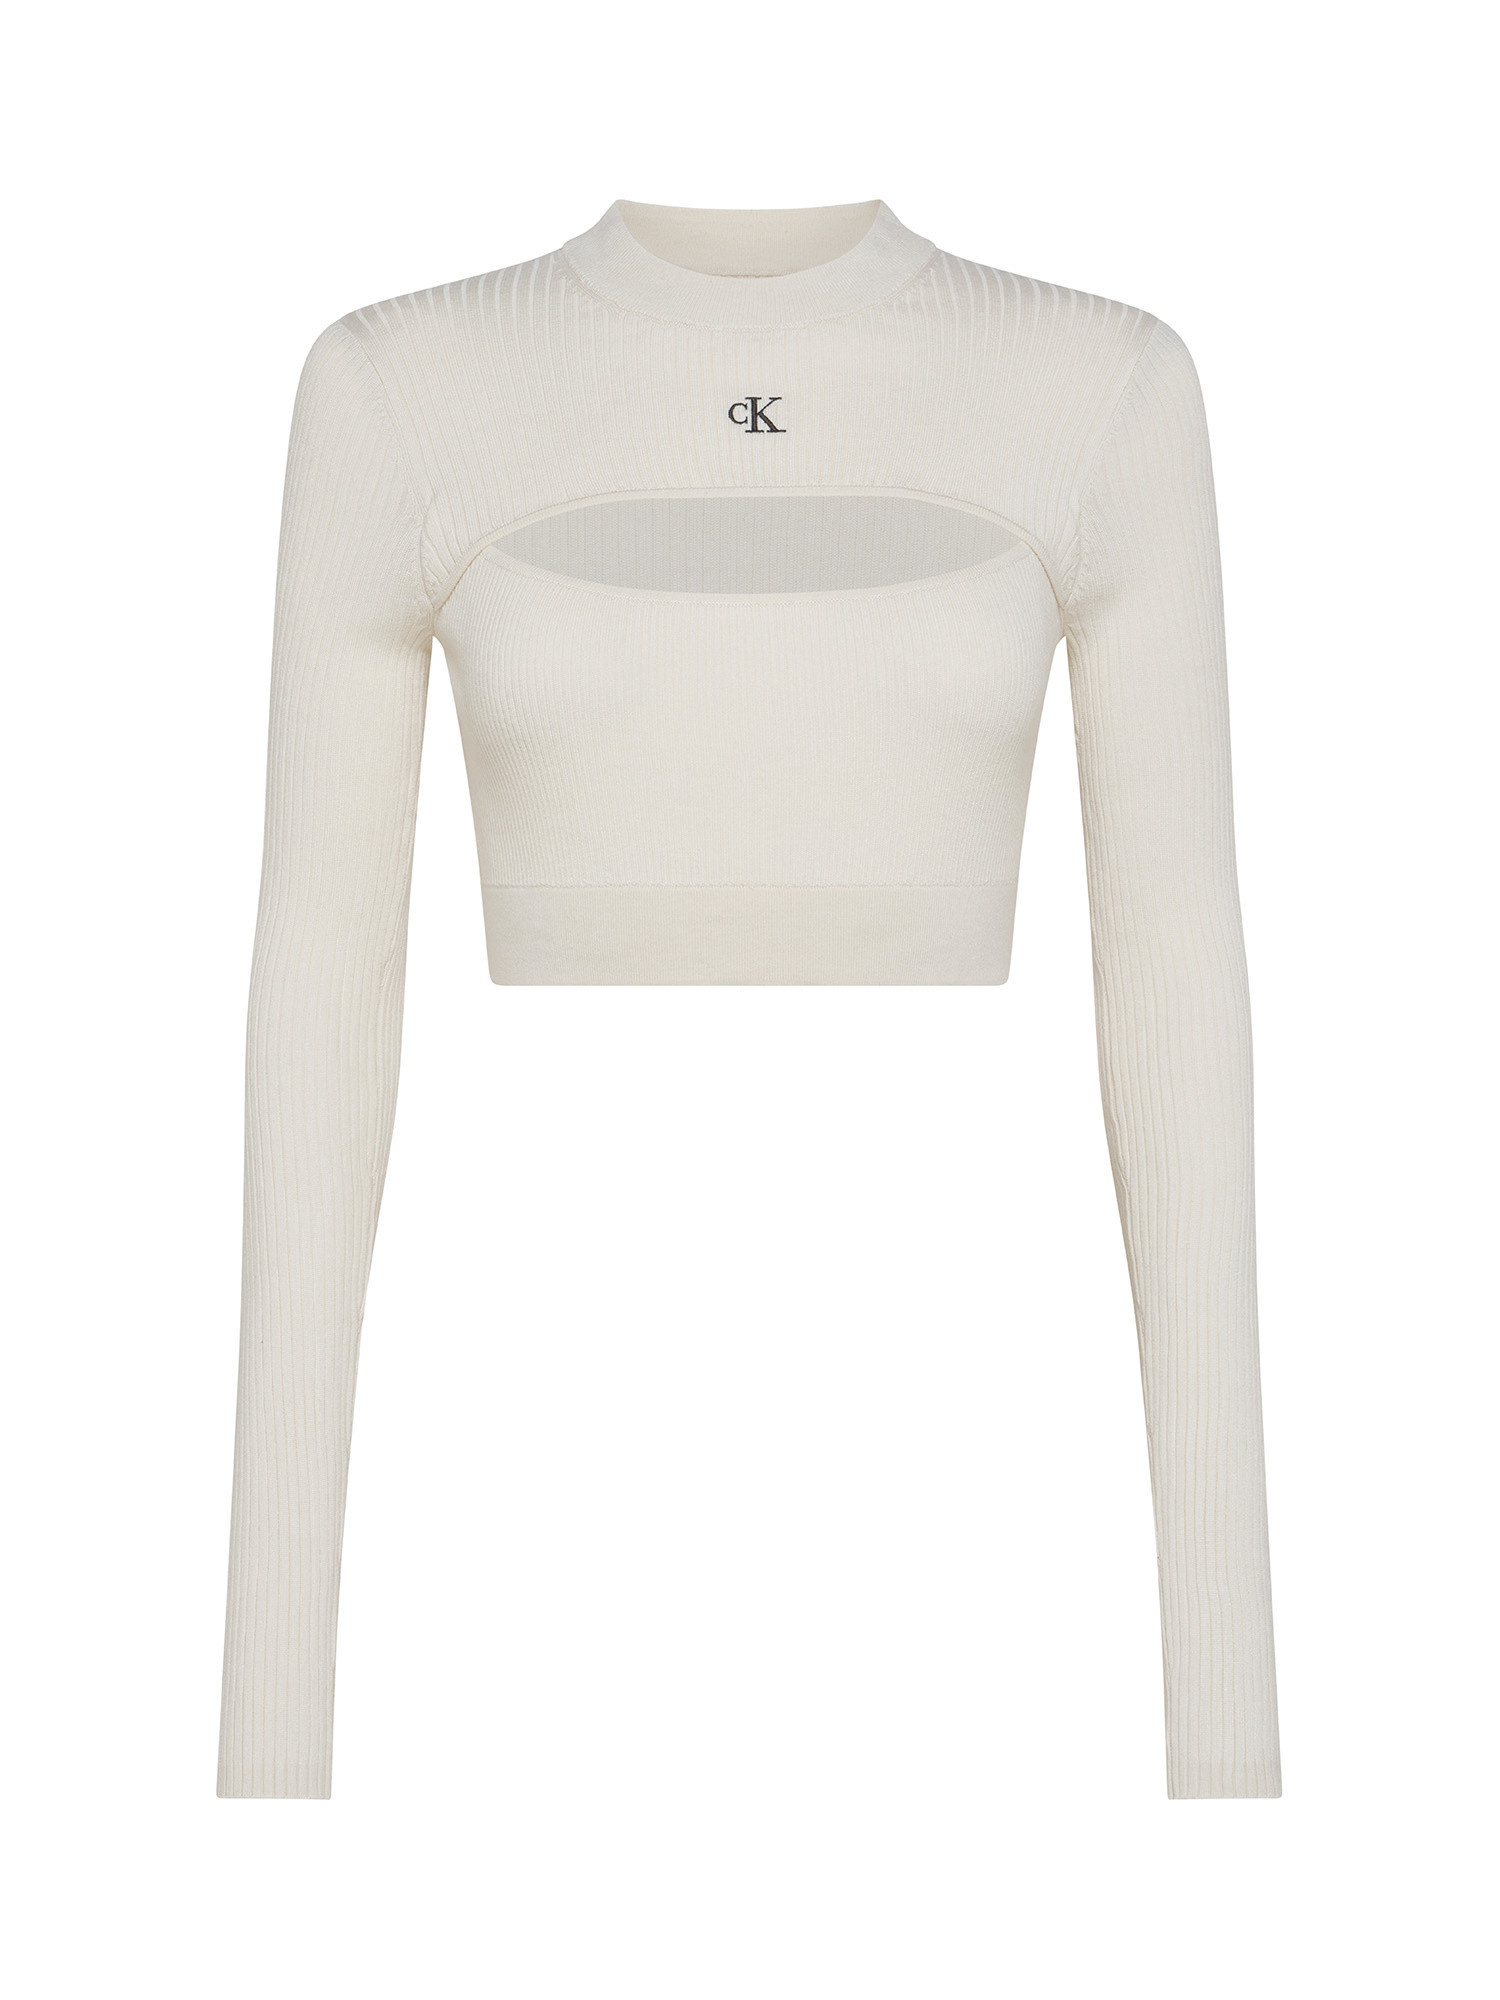 Calvin Klein Jeans - Maglia crop con effetto cut out, Bianco avorio, large image number 0